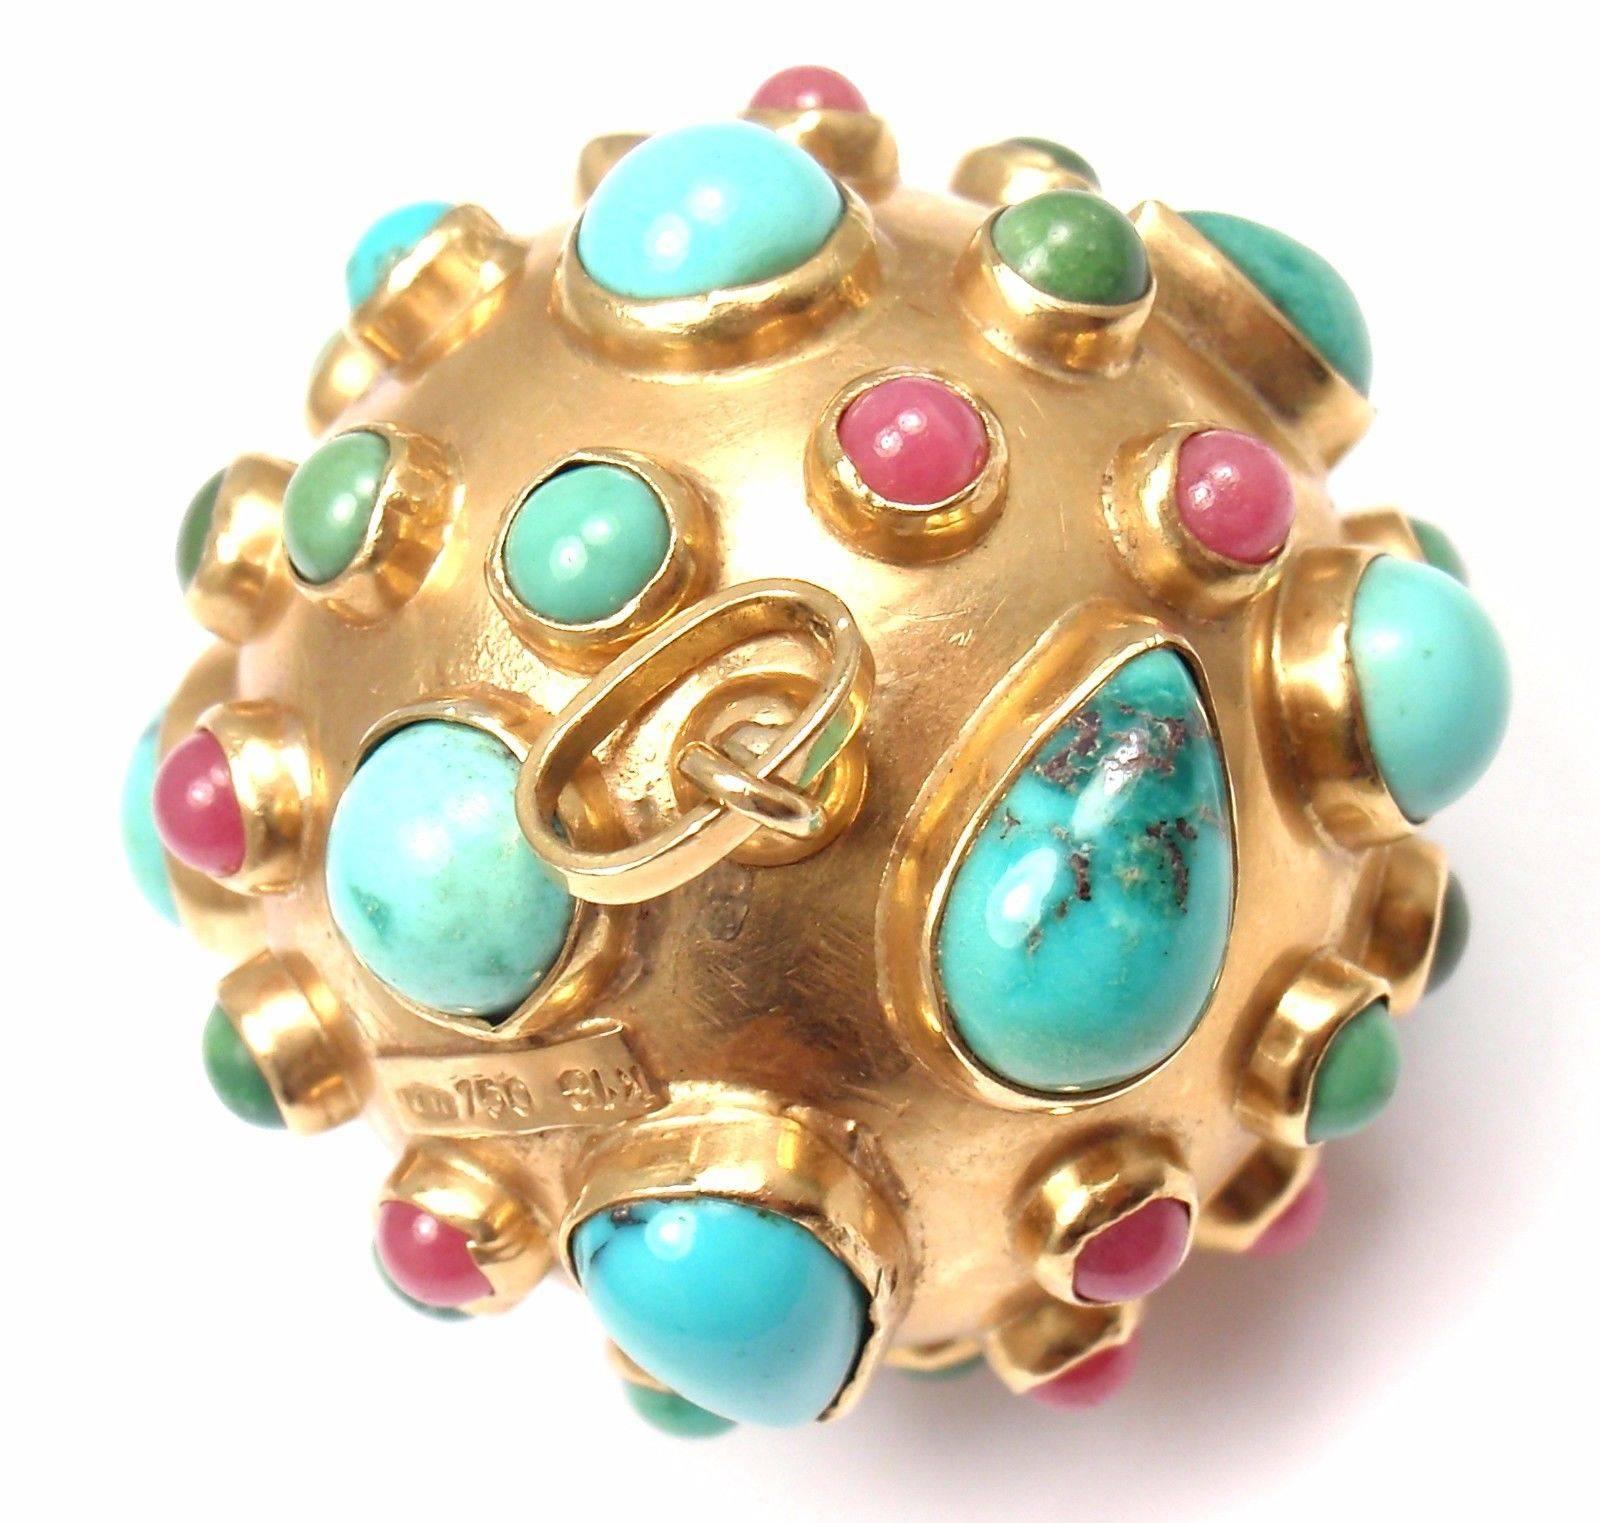 18k Yellow Gold Ruby And Turquoise Large Sputnik Pendant from  Estate of Jackie Collins.
With Different shapes of Turquoise, Ruby stones.

Details: 
Weight: 23 grams
Measurements: 1.5